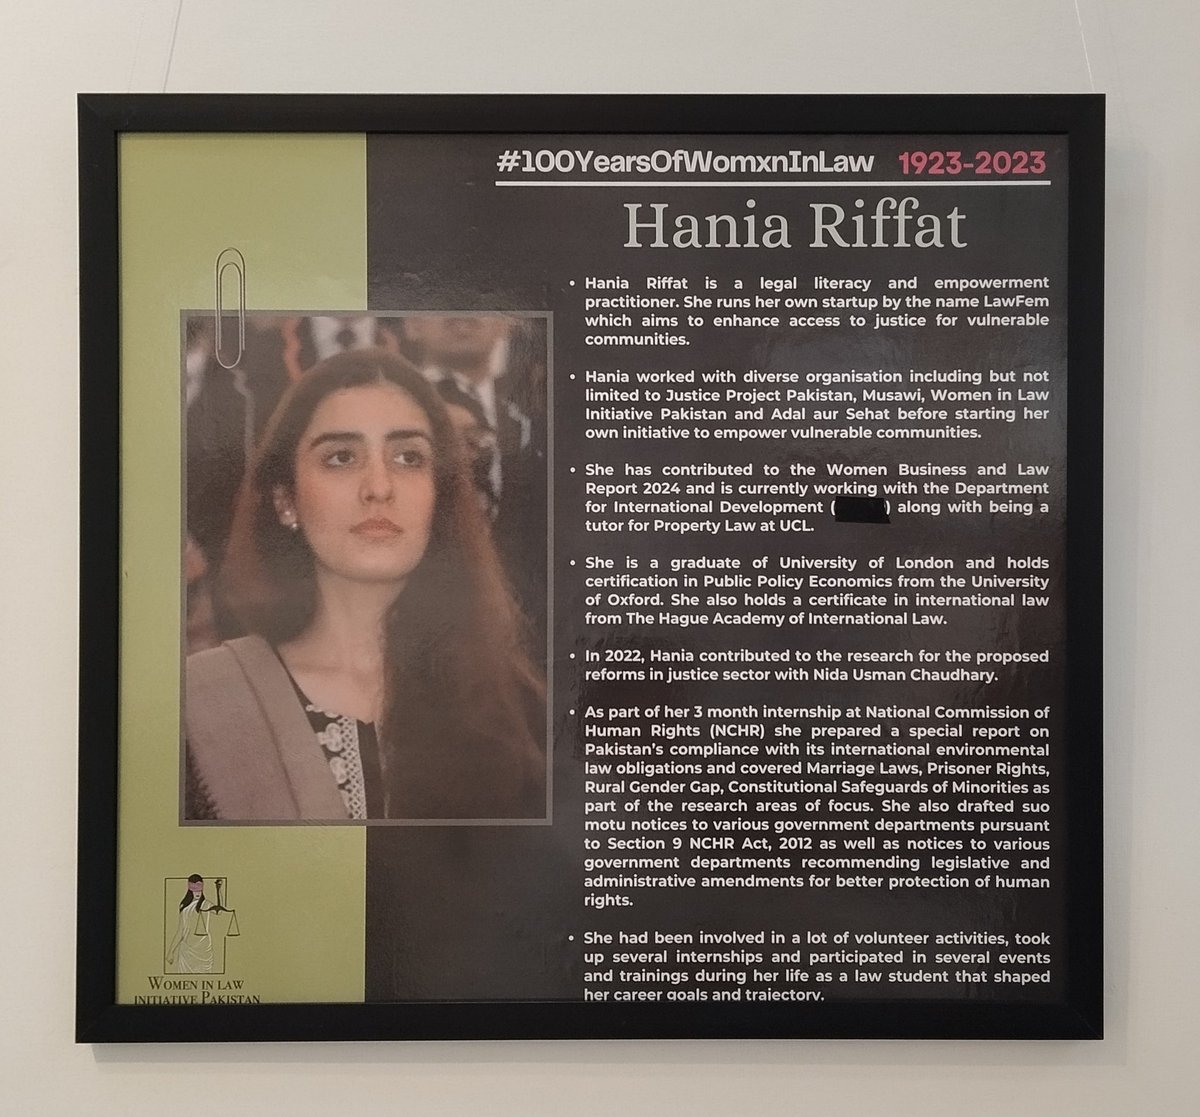 Our founder, @AaminahQ and member of our legal team, Hania Riffat, were recognized at the @WomenInLawPk 100 Years Photo Exhibition for their contributions in advancing legal rights for women. Thank you @NidaUsmanCh for showcasing remarkable women in law. #VisibilityMatters